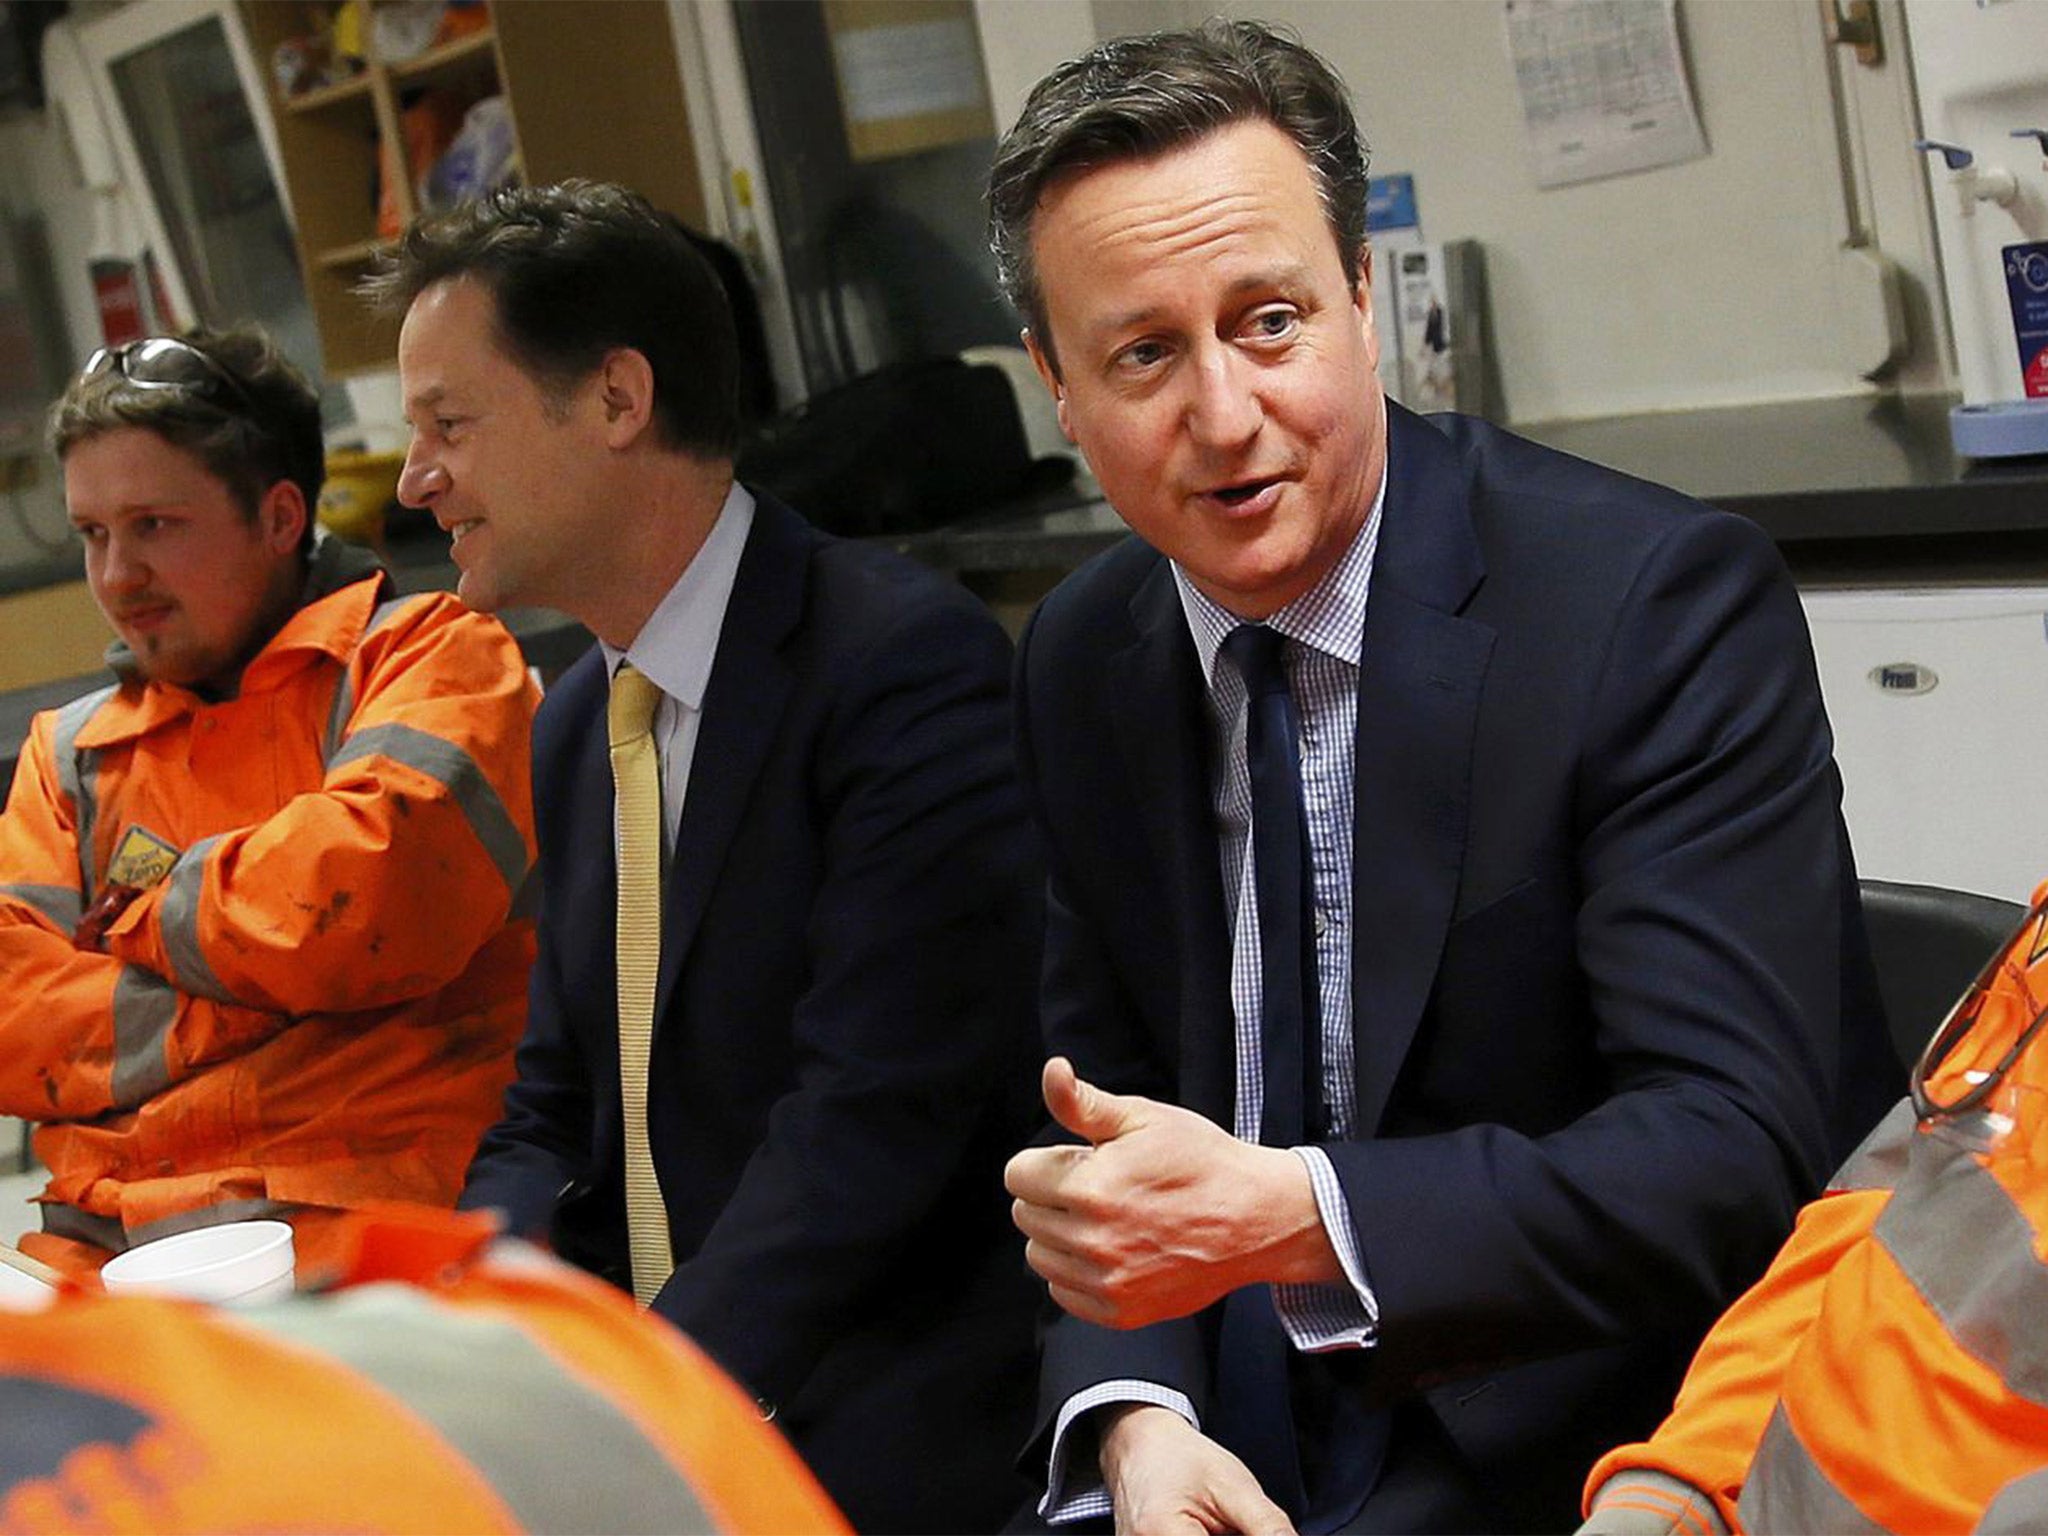 David Cameron and Nick Clegg speak to Crossrail workers in London on Tuesday